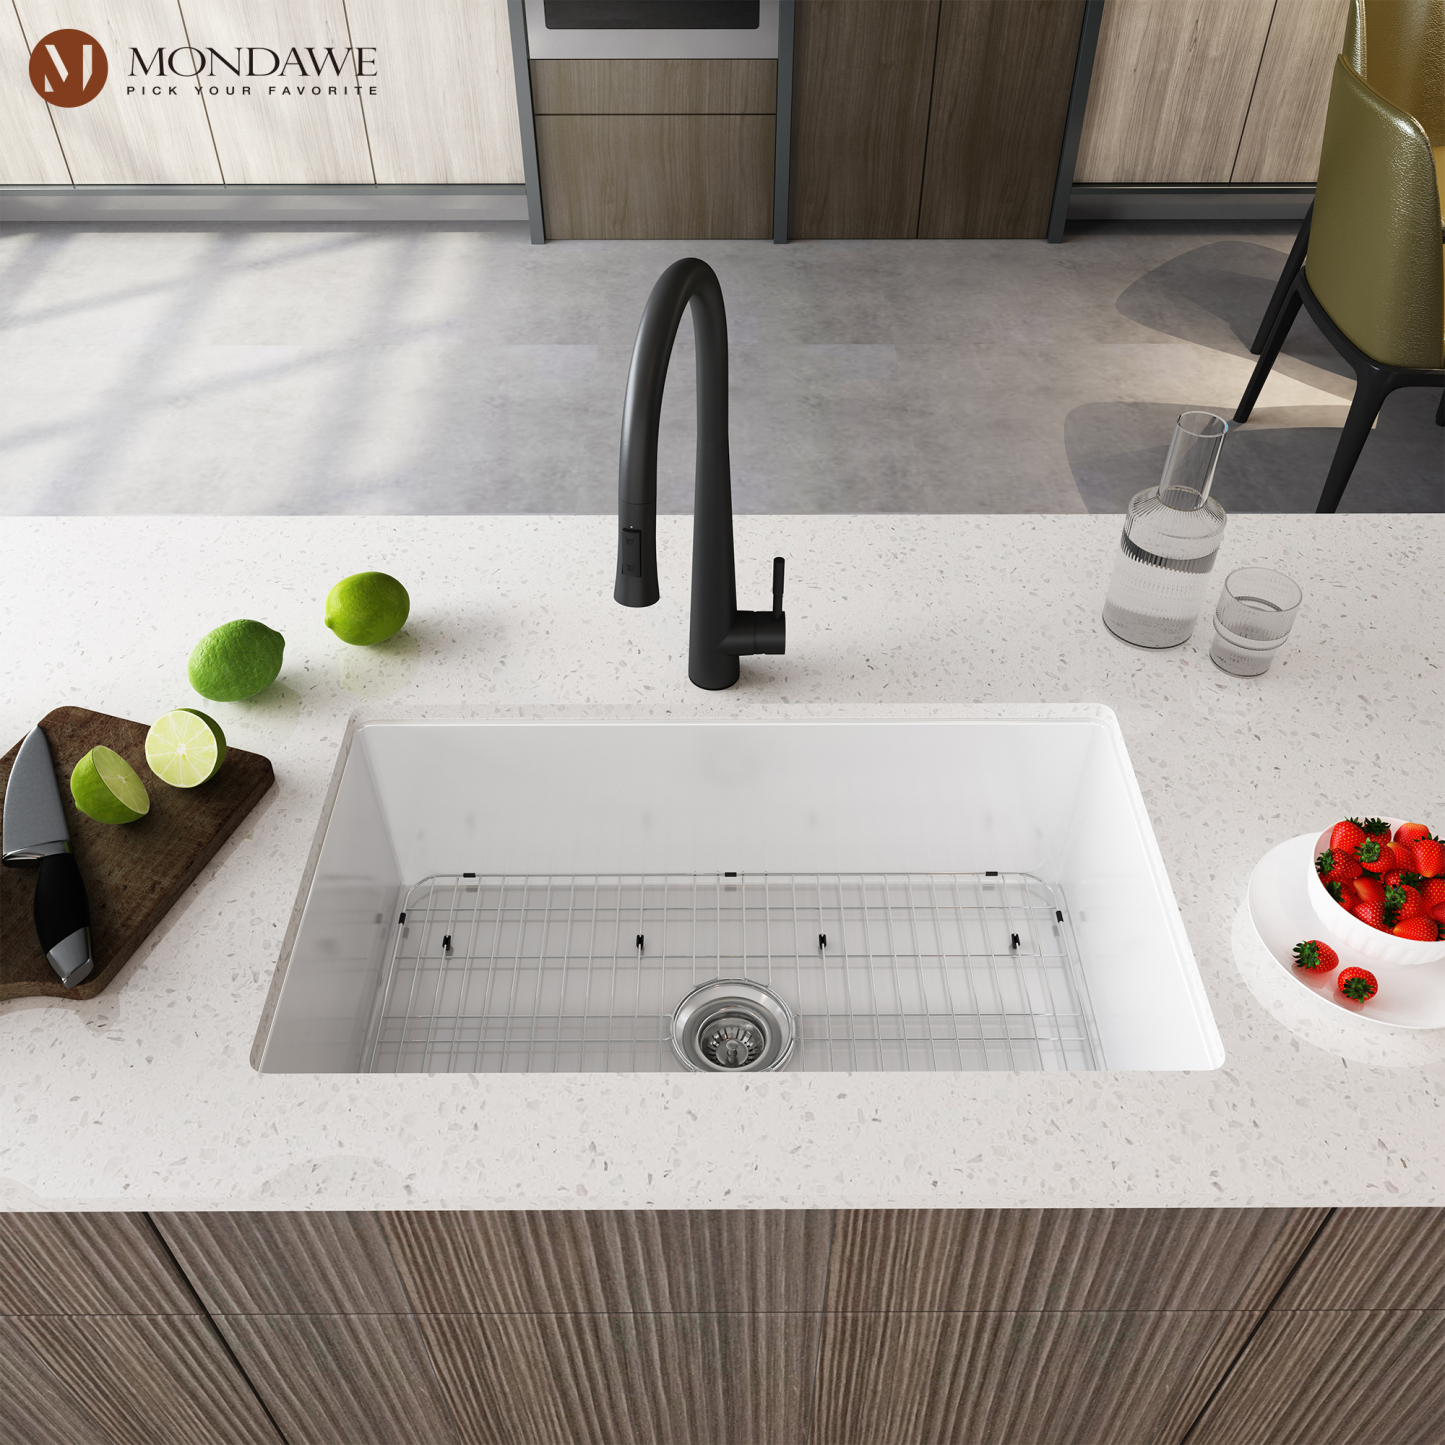 Undermount 32 in. single bowl fireclay kitchen sink in white comes with stainless steel bottom grid and strainer-Mondawe